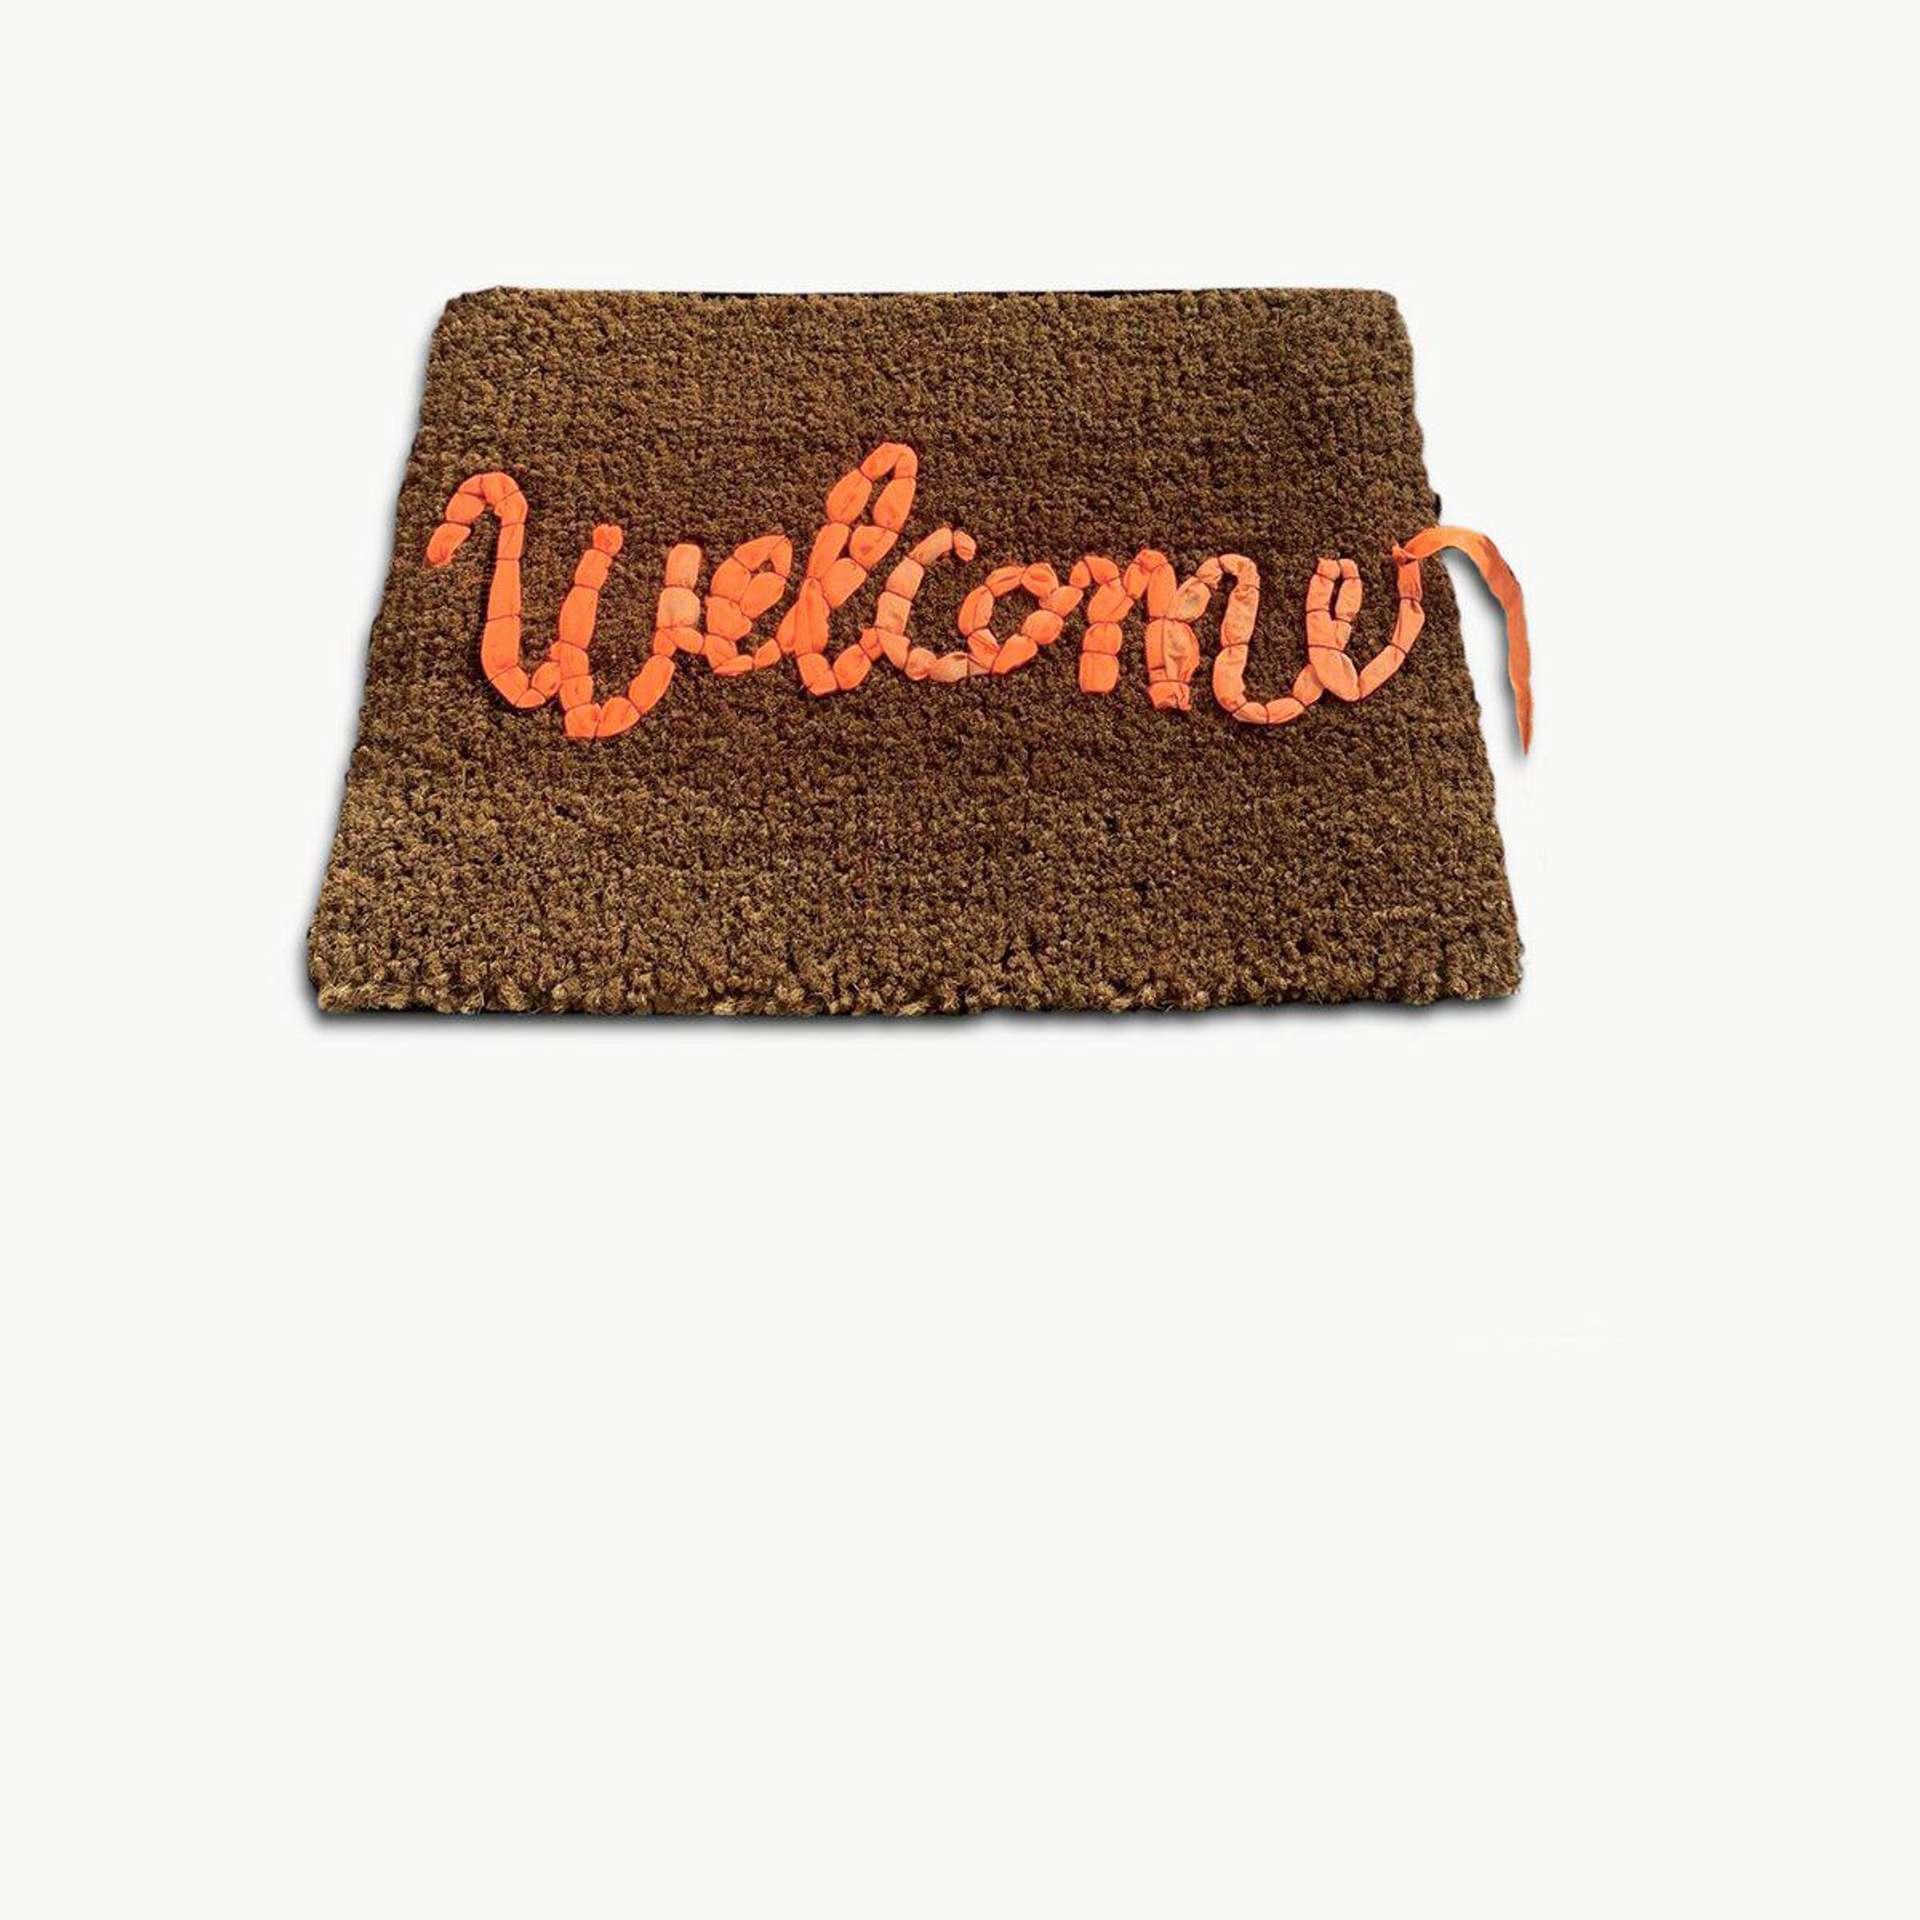 Banksy™ Welcome Mat by Banksy